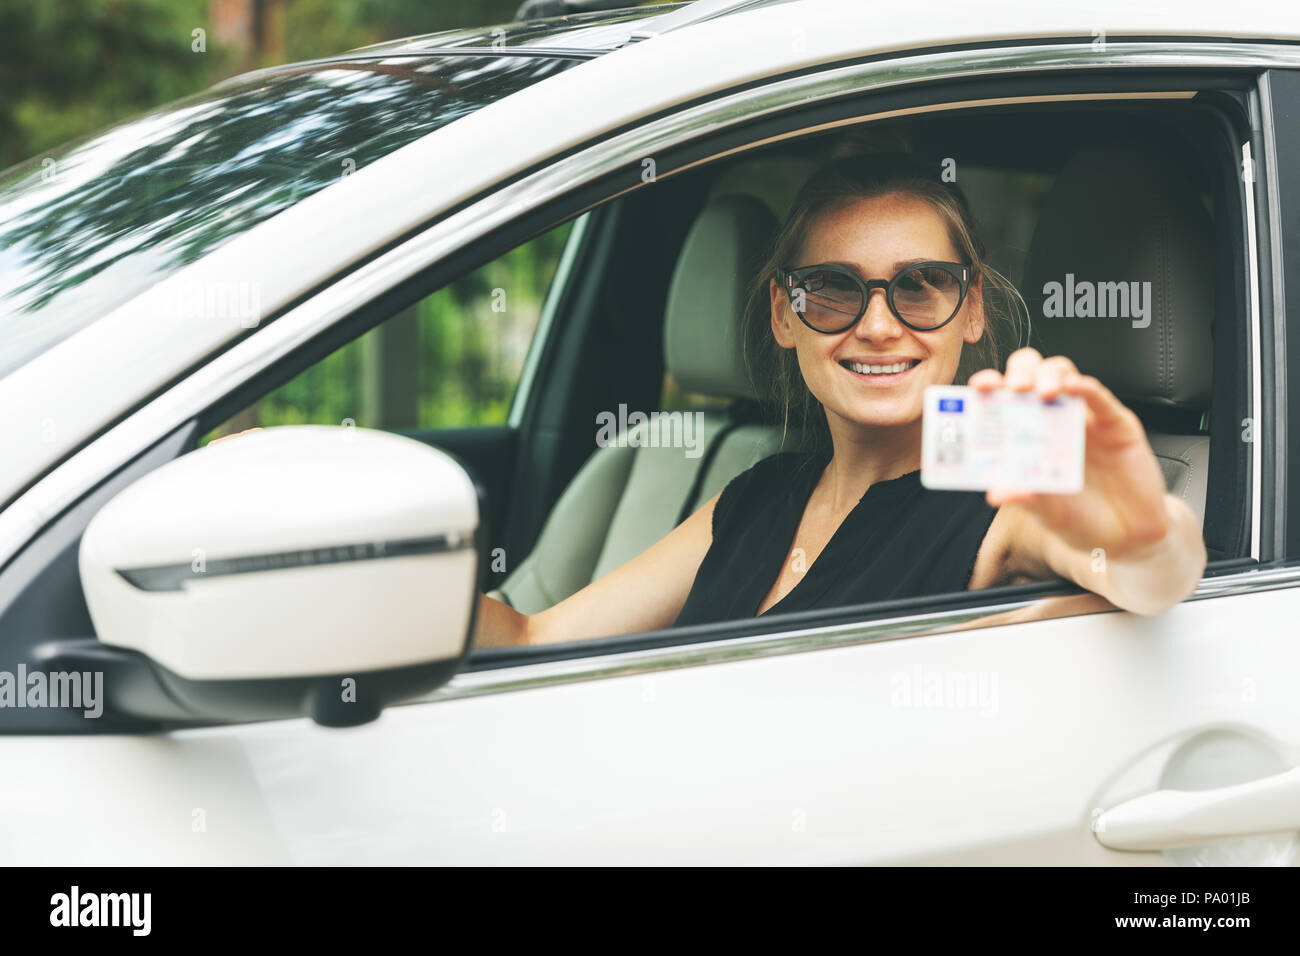 happy young woman showing her driver license through the car window Stock Photo